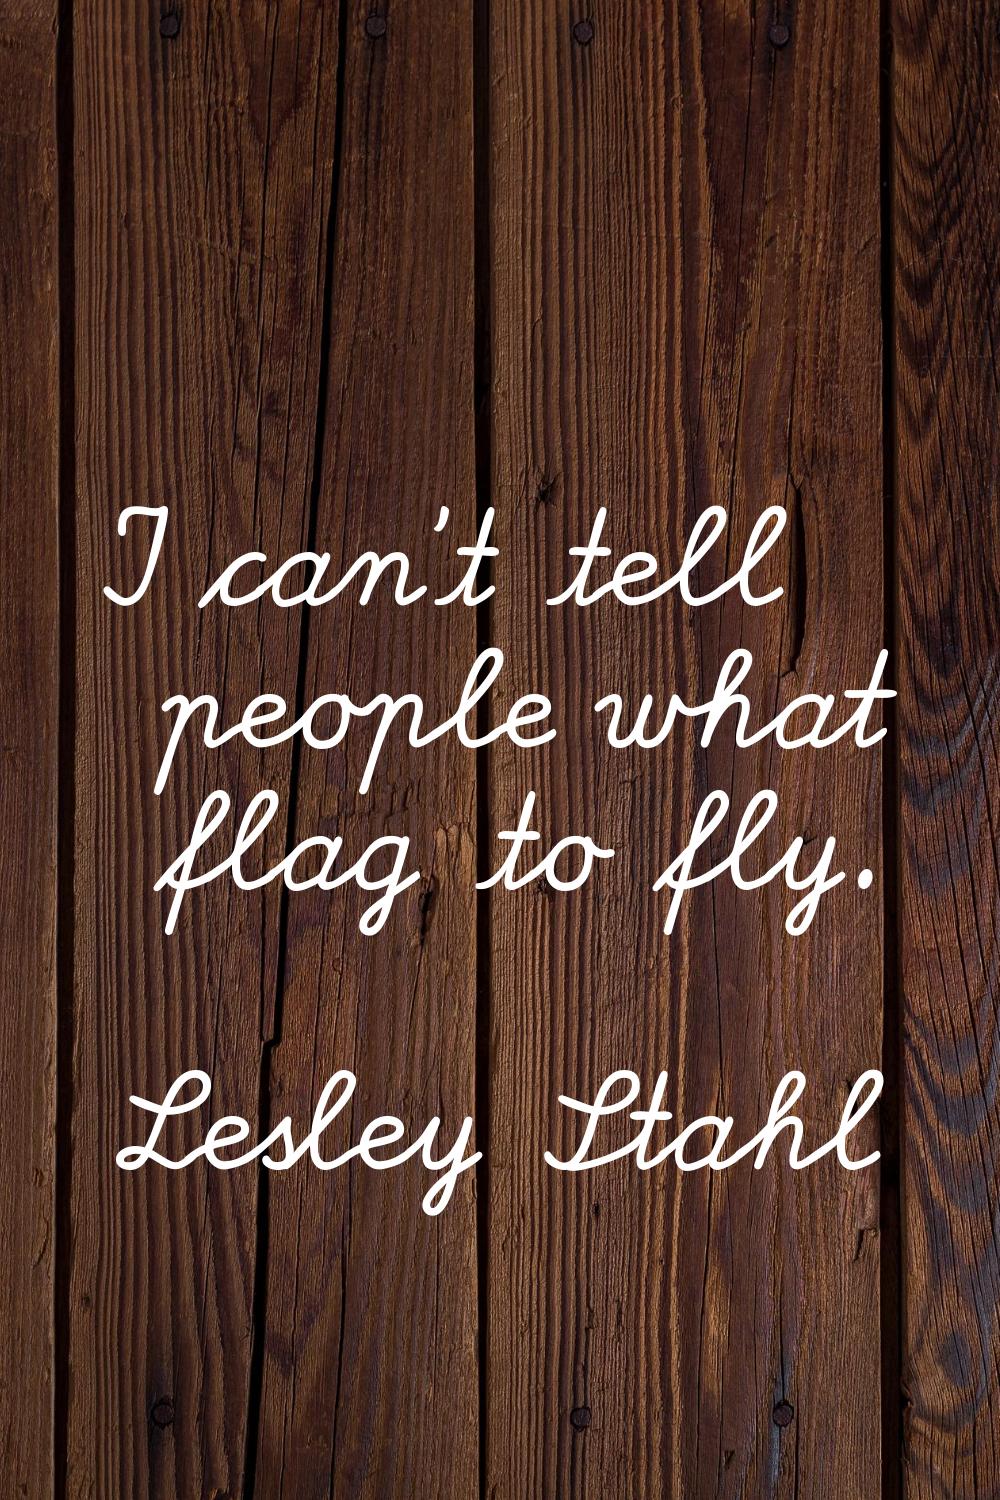 I can't tell people what flag to fly.